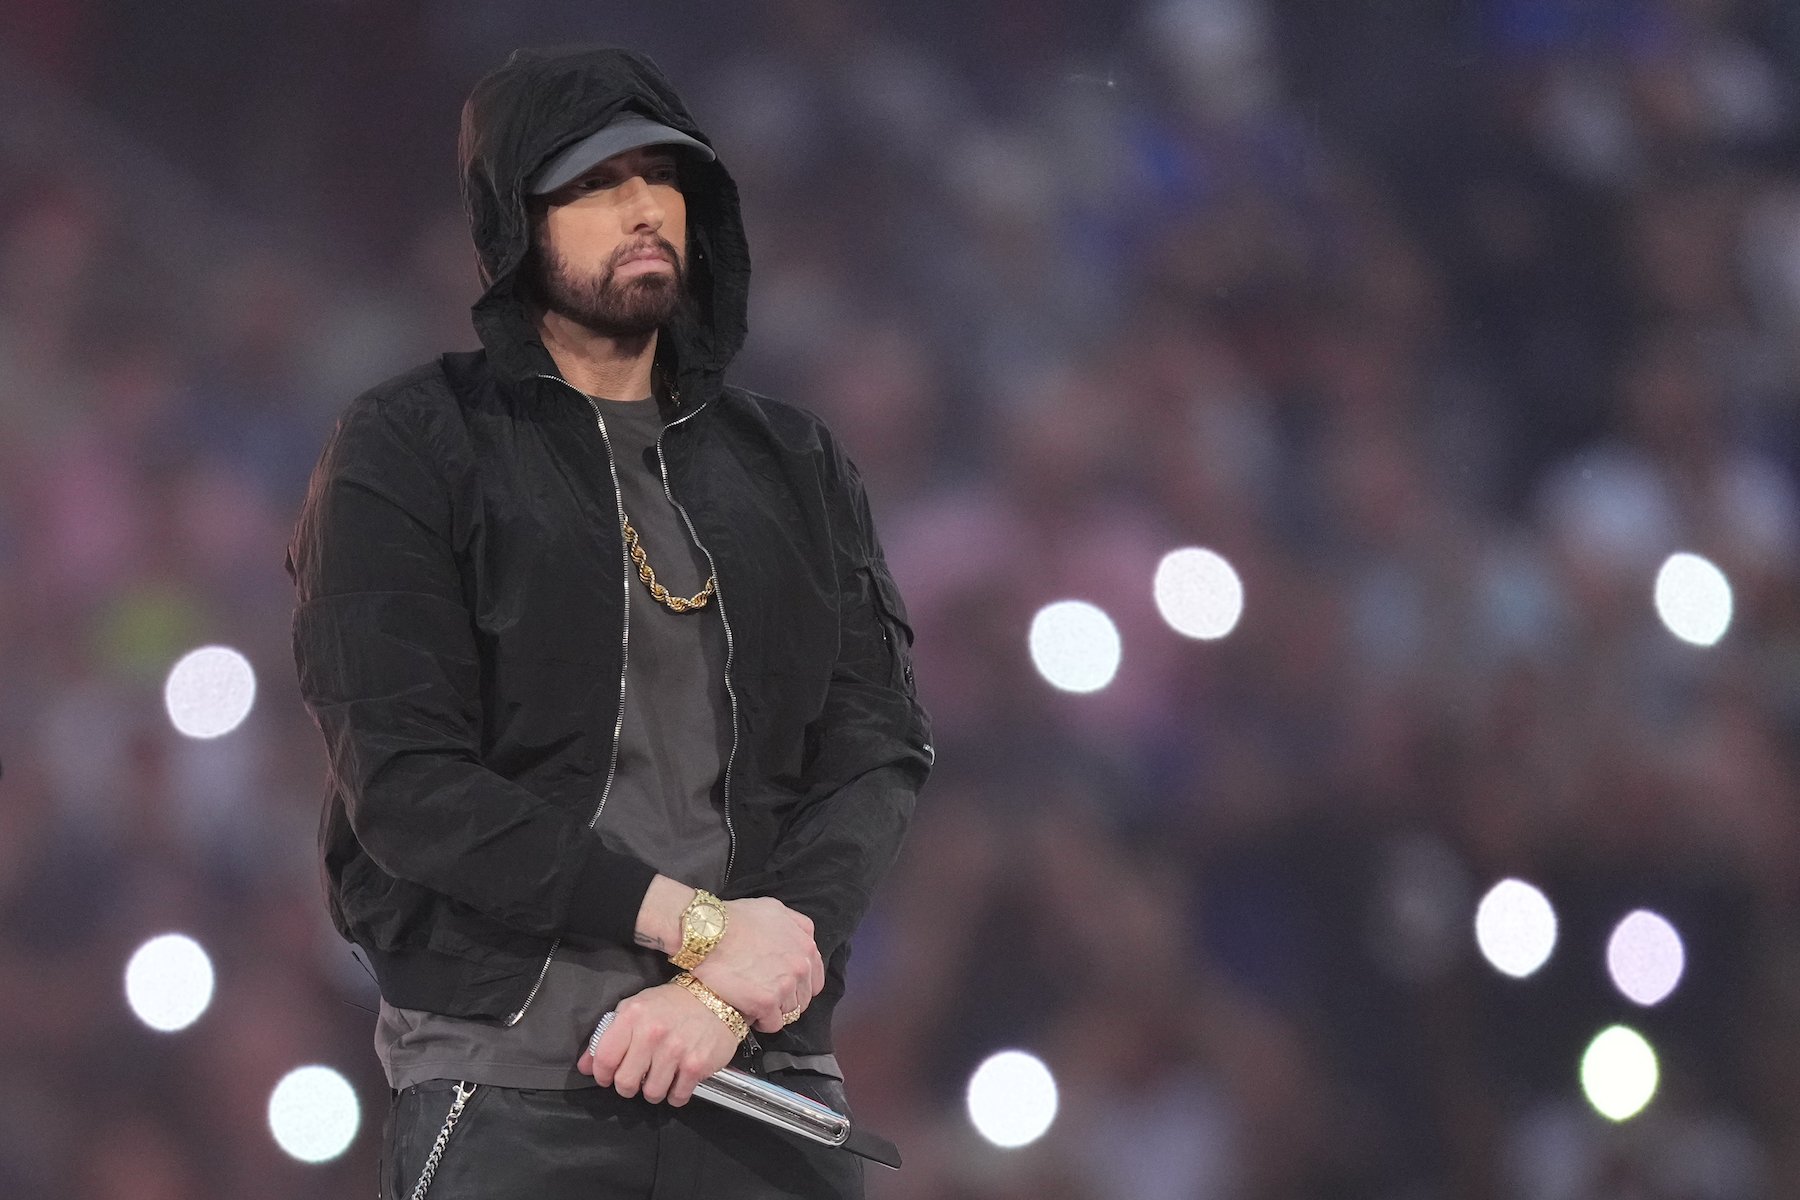 Eminem, who suffered an overdose in 2007, performing at the 2022 Super Bowl halftime show.